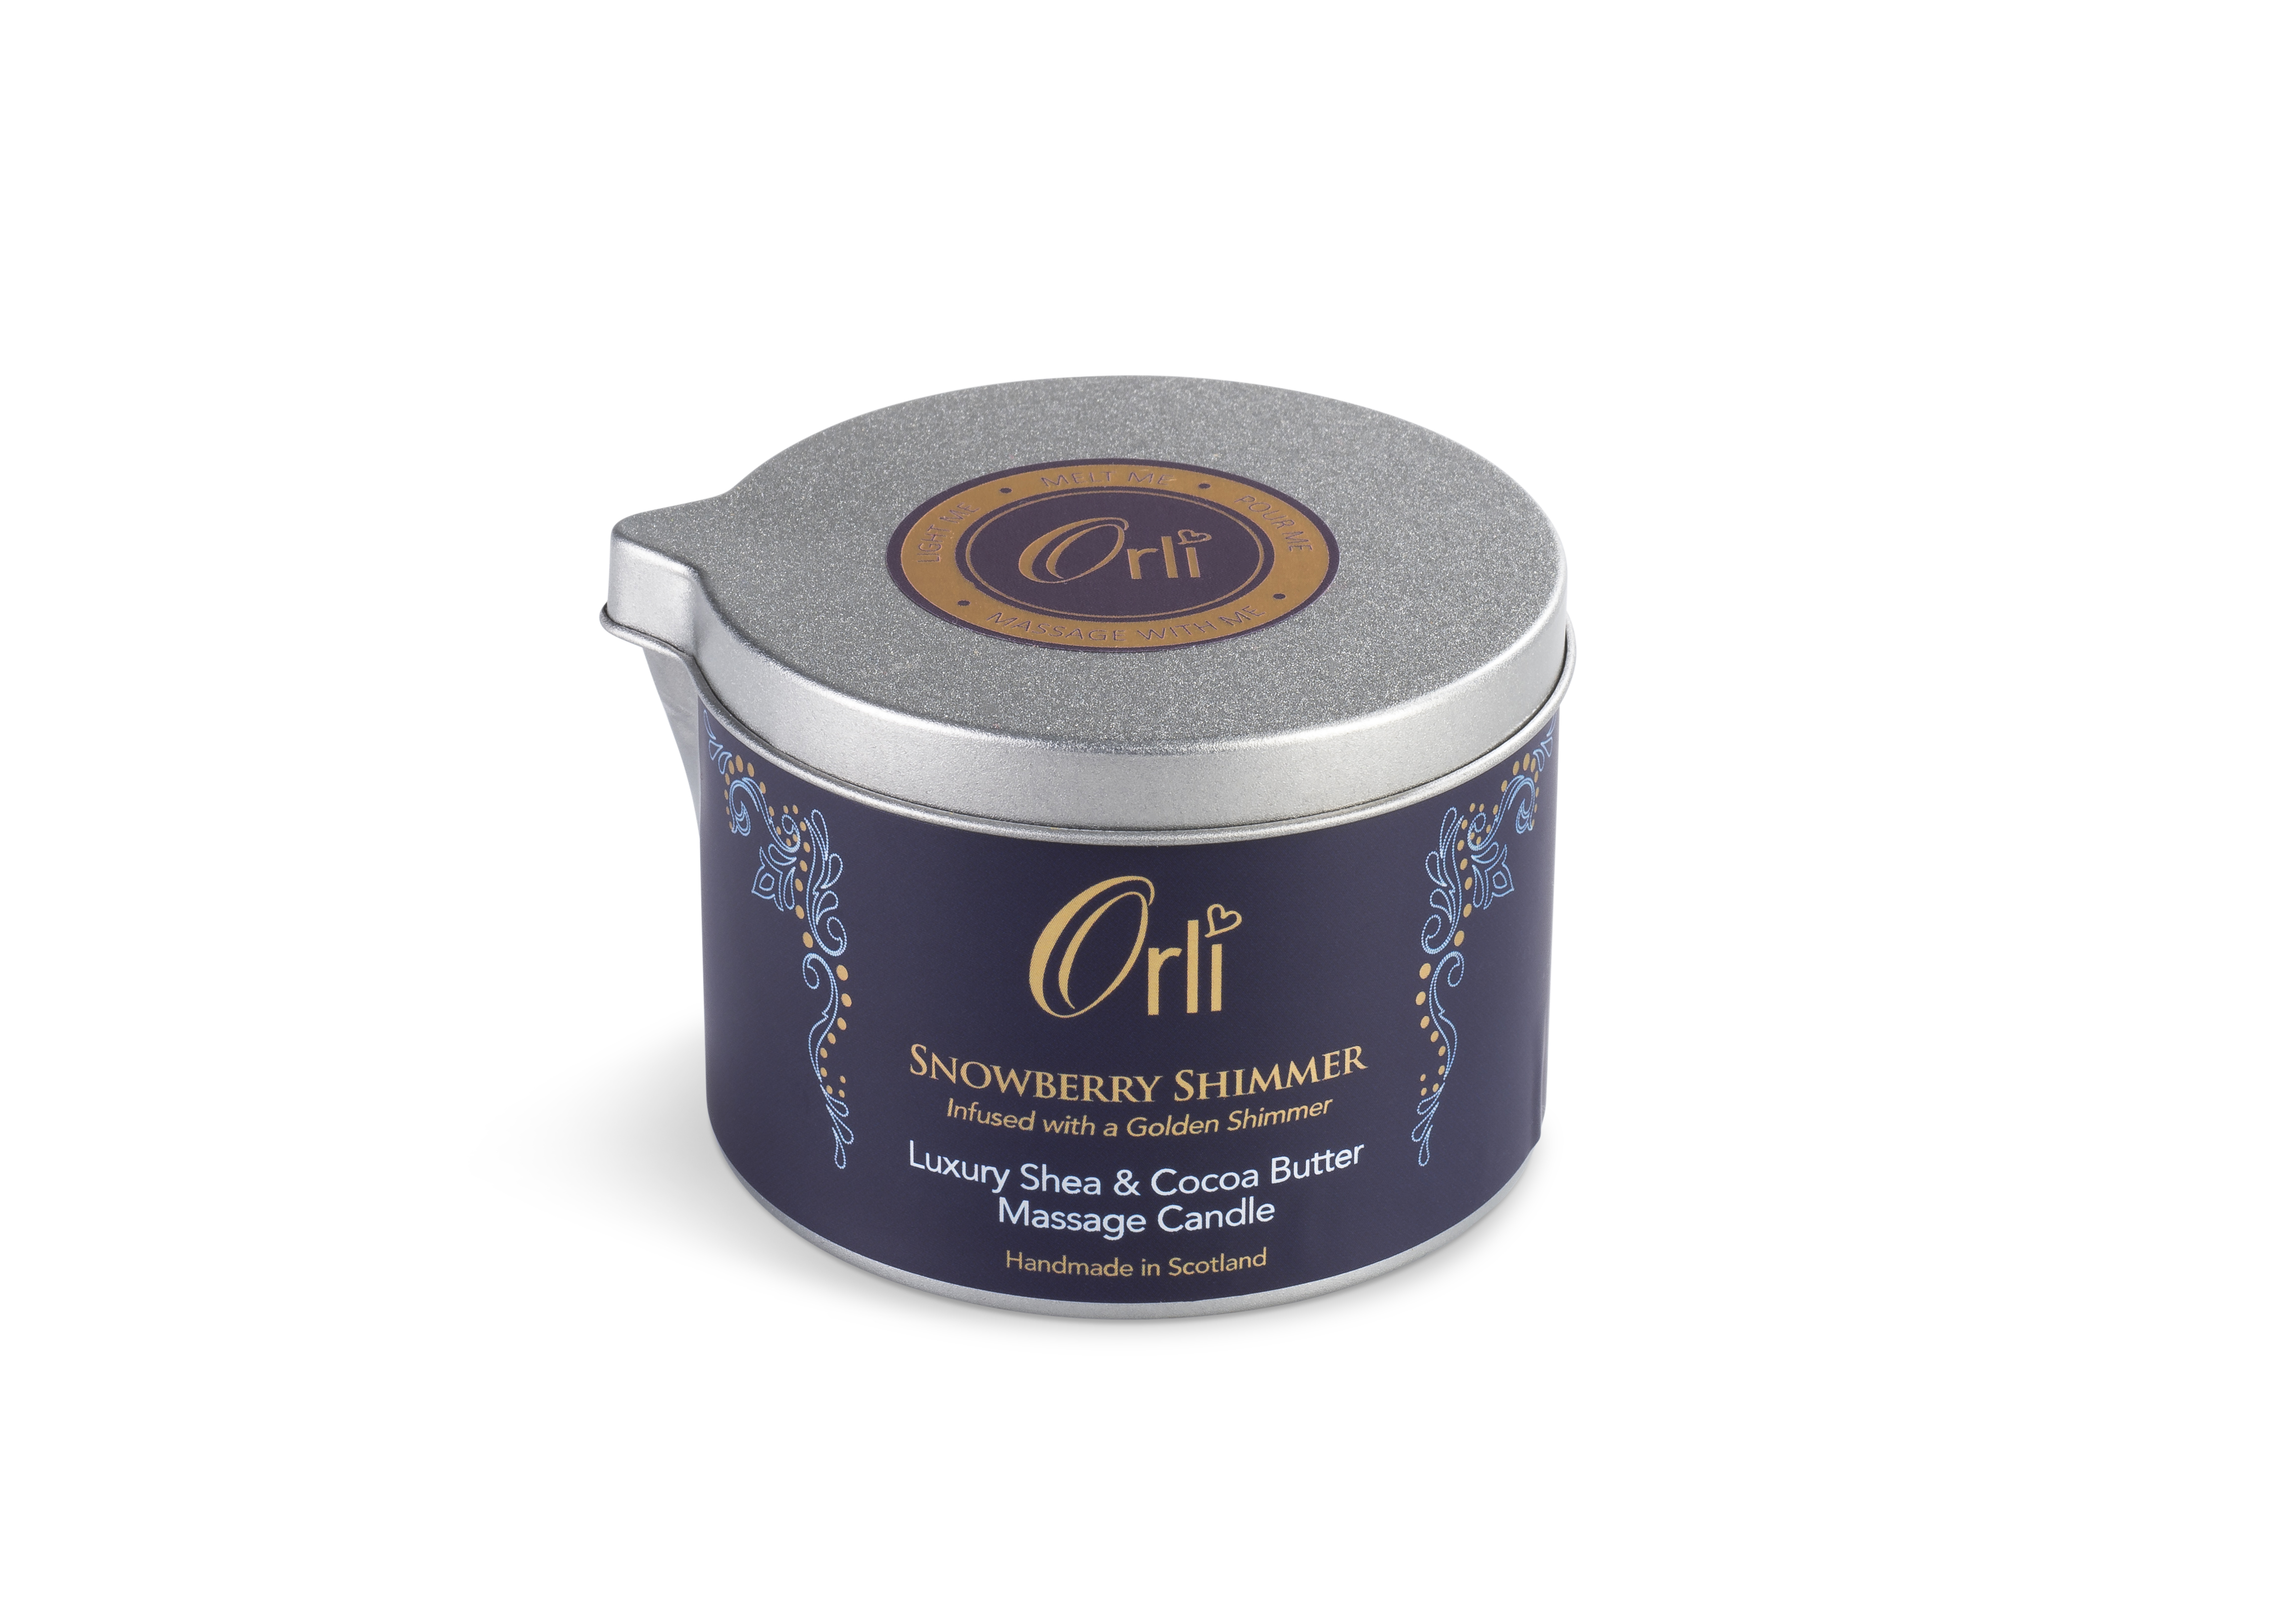 Snowberry Shimmer Massage Candle by Orli